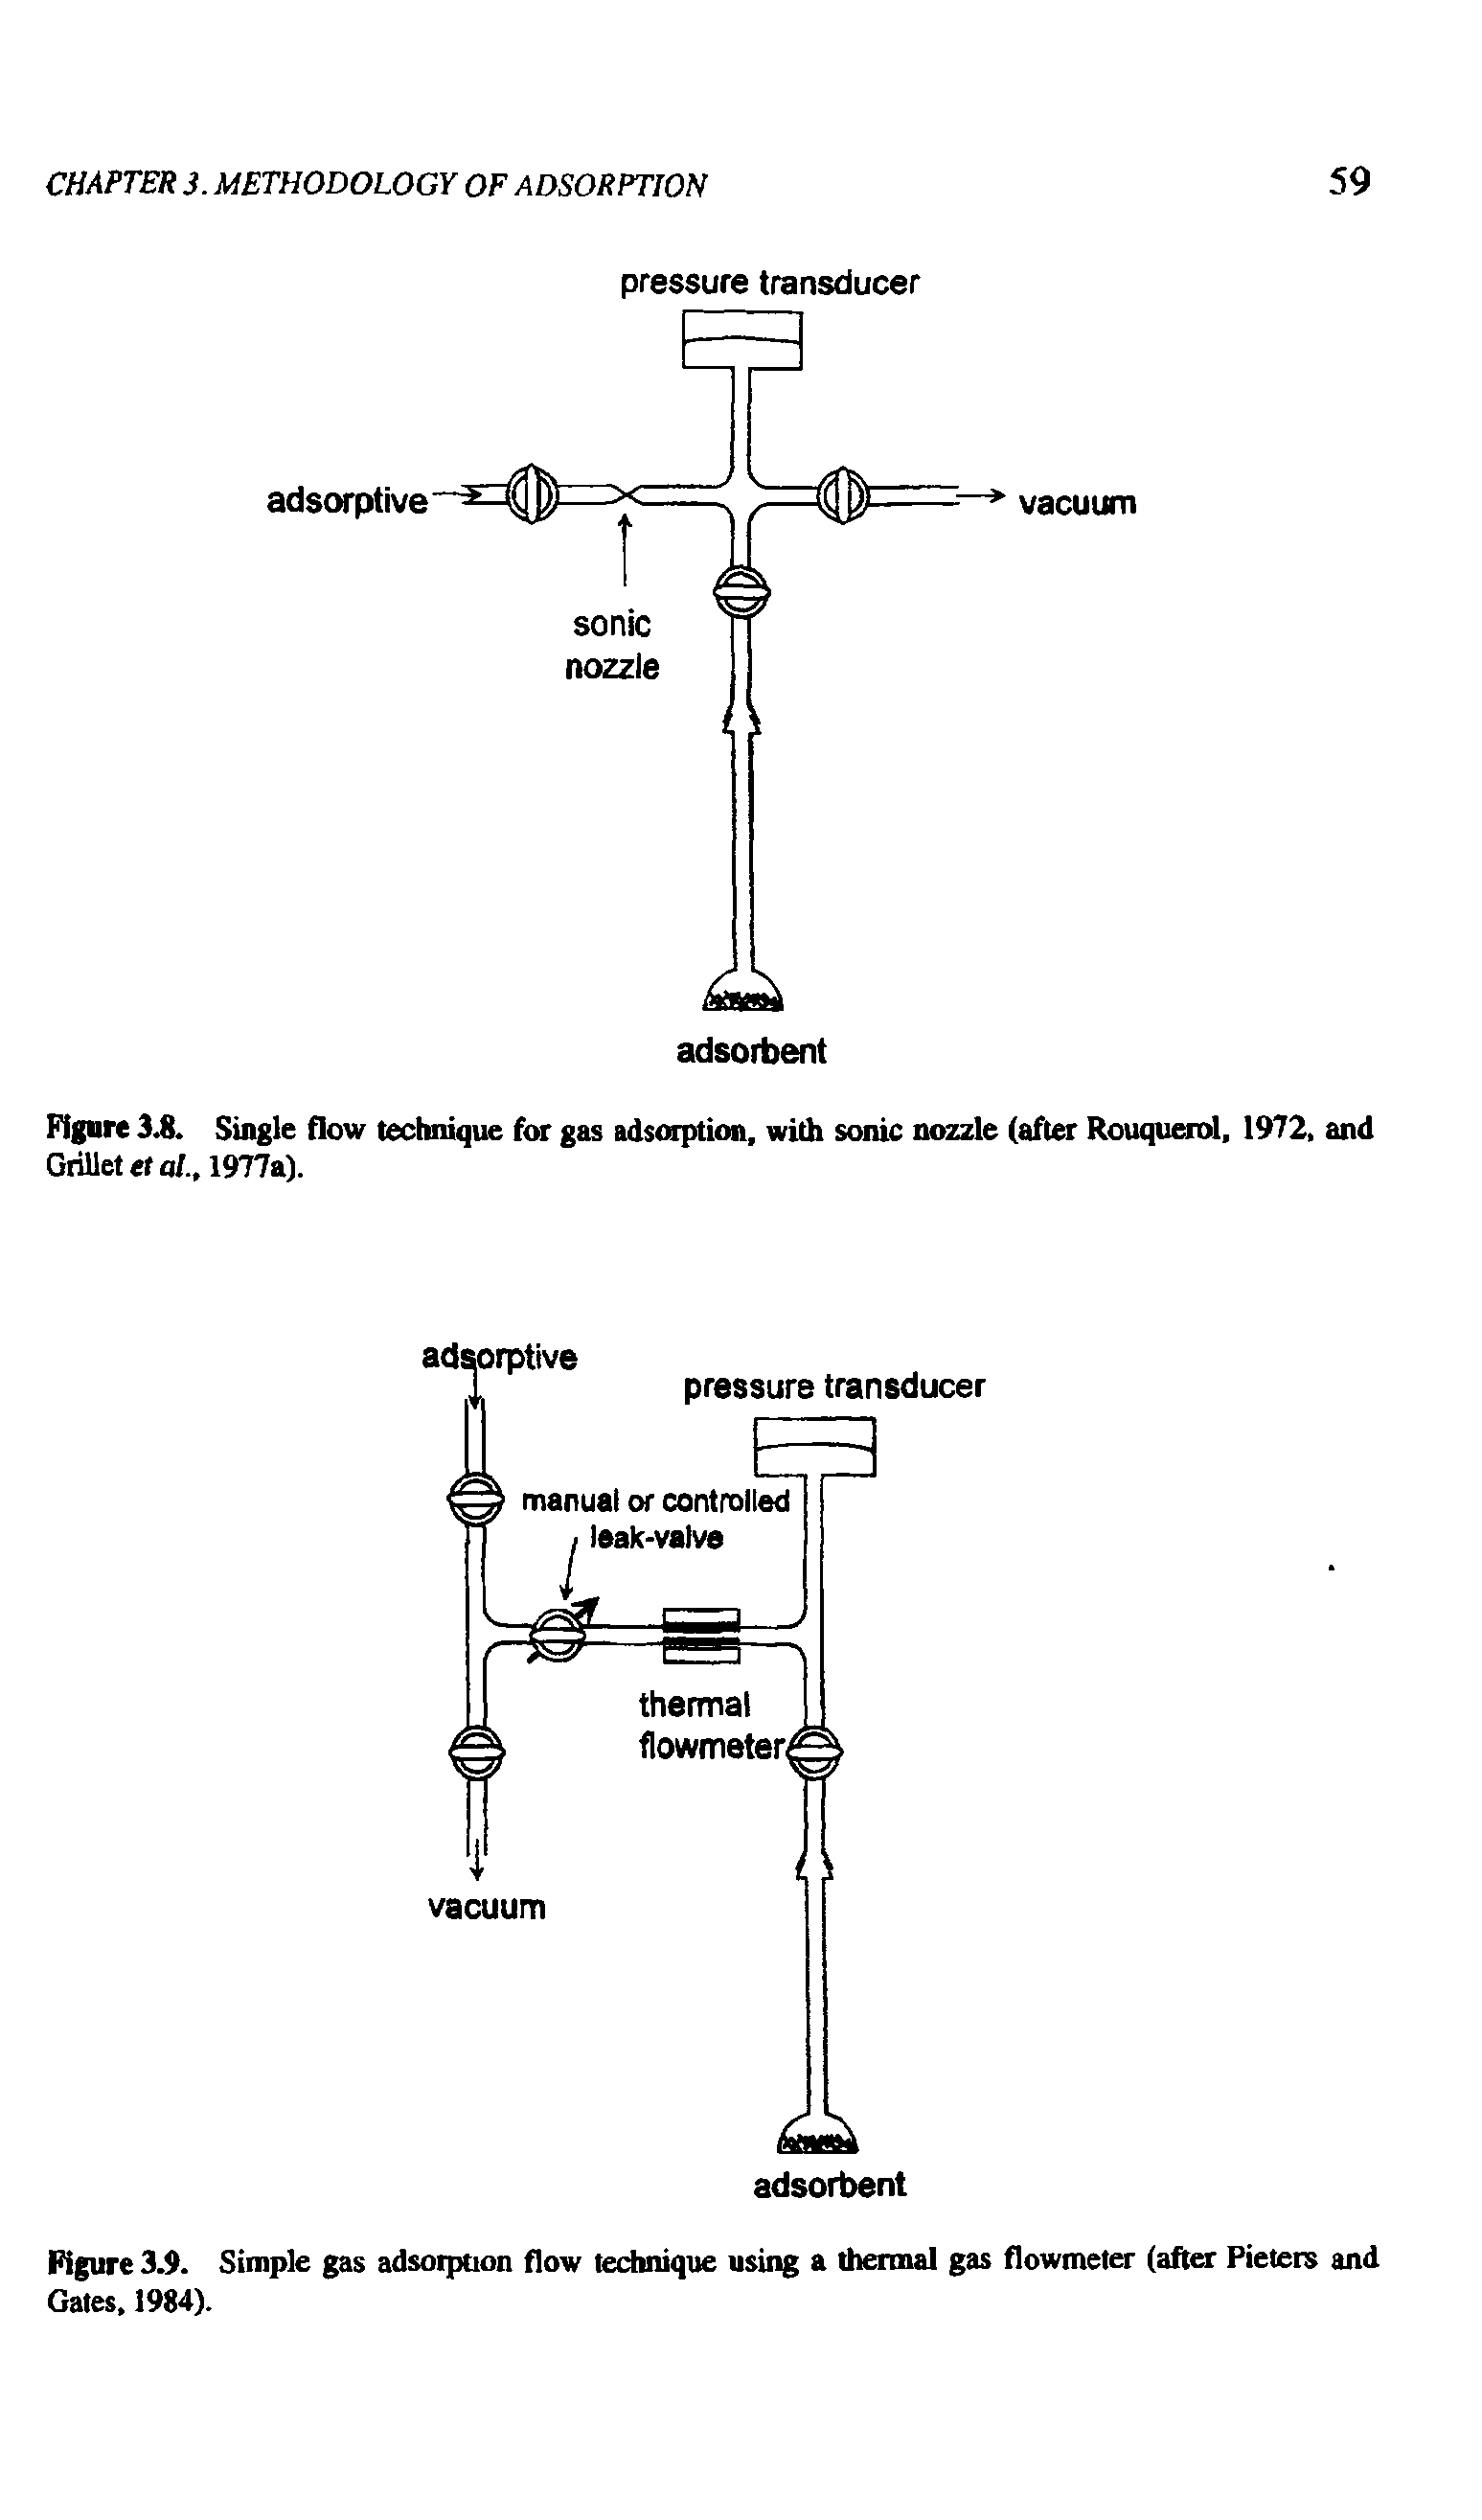 Figure 3.8. Single flow technique for gas adsorption, with sonic nozzle (after Rouquerol, 1972, and Grillet et at., 1977a).